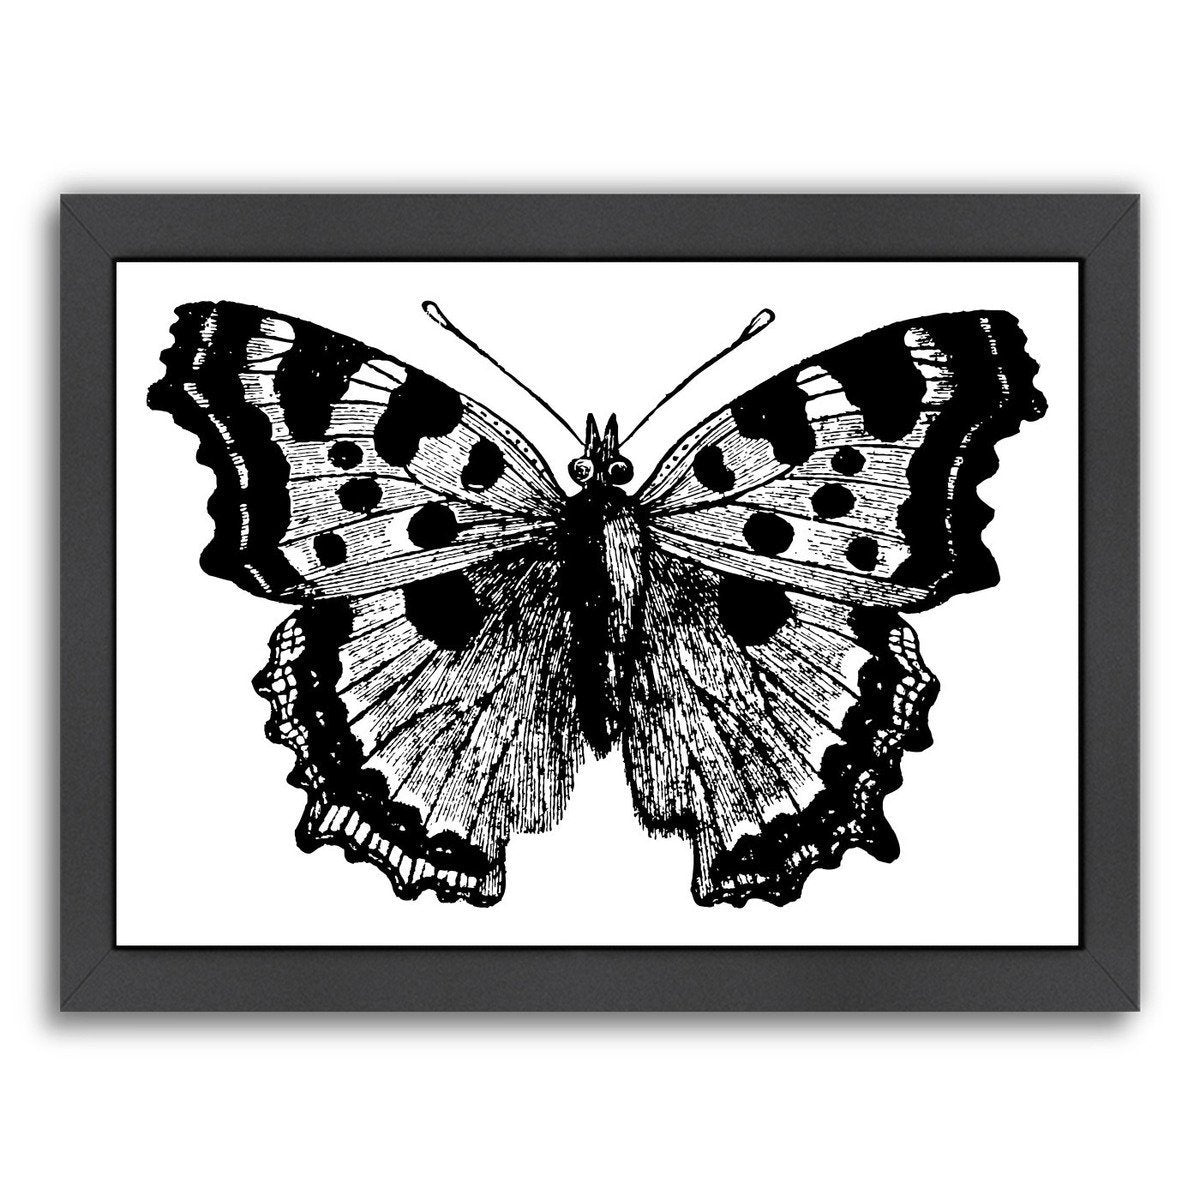 Butterfly 1 by Amy Brinkman Framed Print - Americanflat